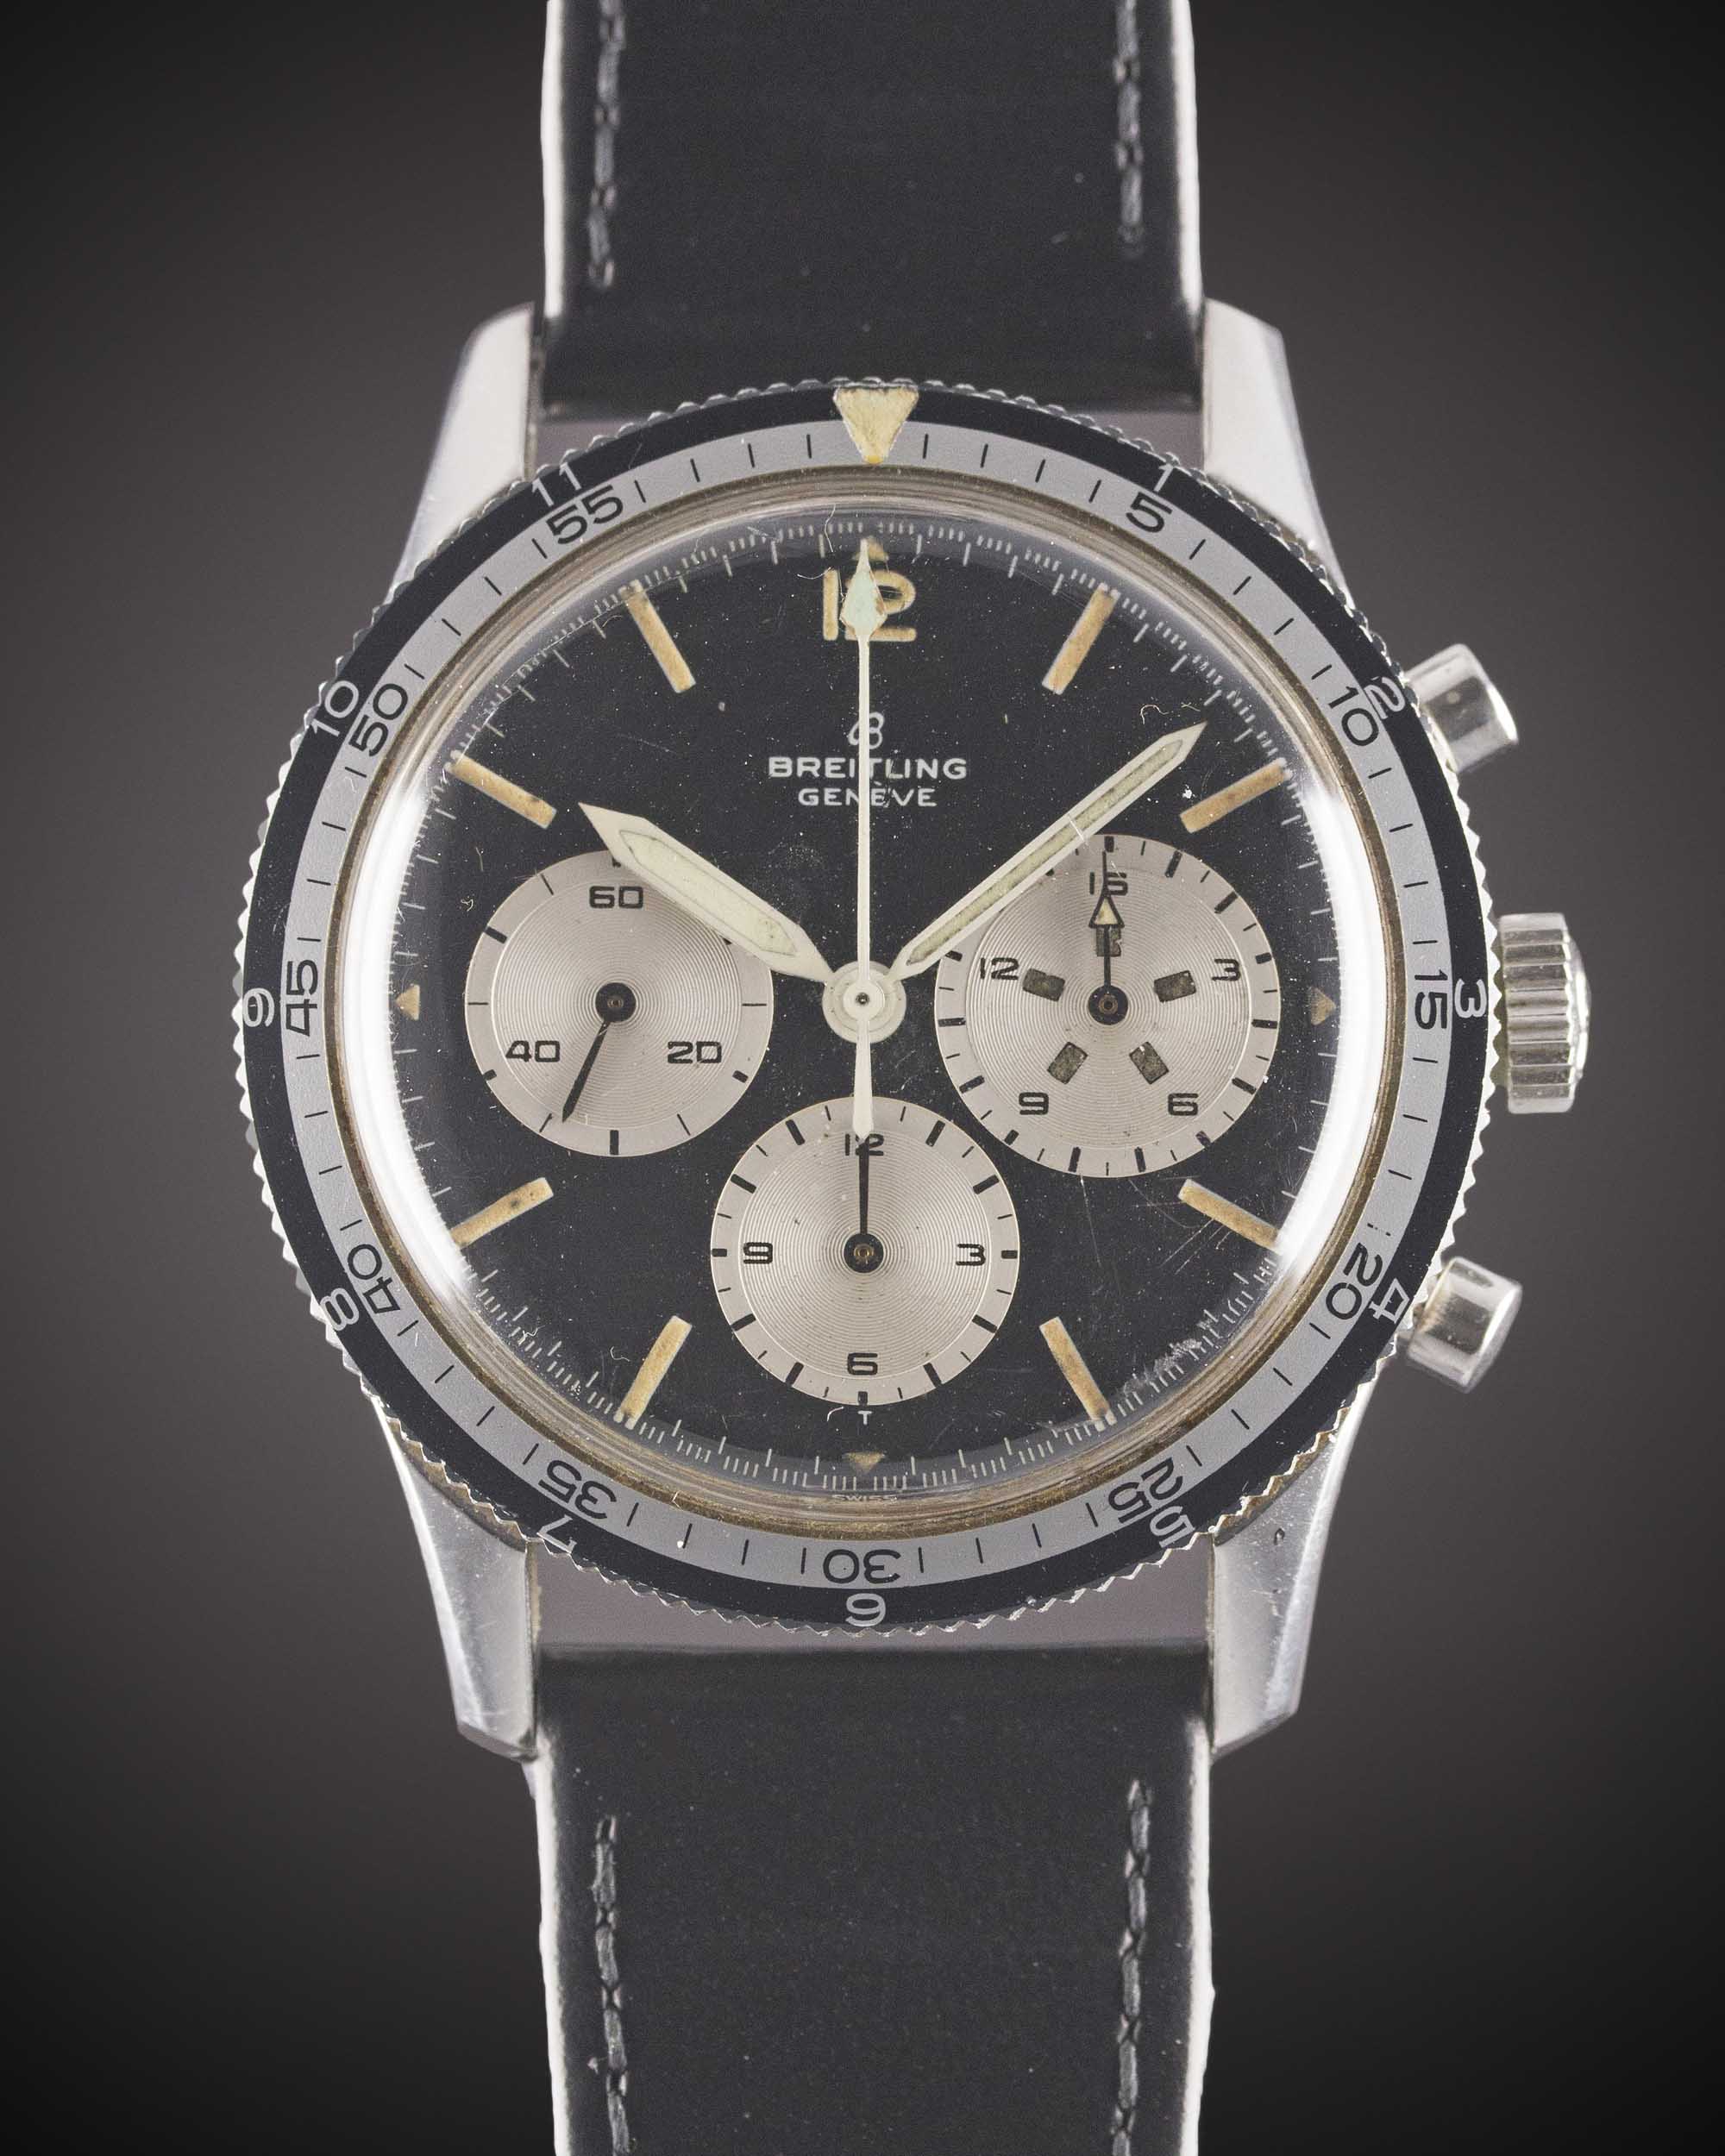 A RARE GENTLEMAN'S STAINLESS STEEL BREITLING 765 CO PILOT CHRONOGRAPH WRIST WATCH CIRCA 1966, REF. - Image 2 of 10